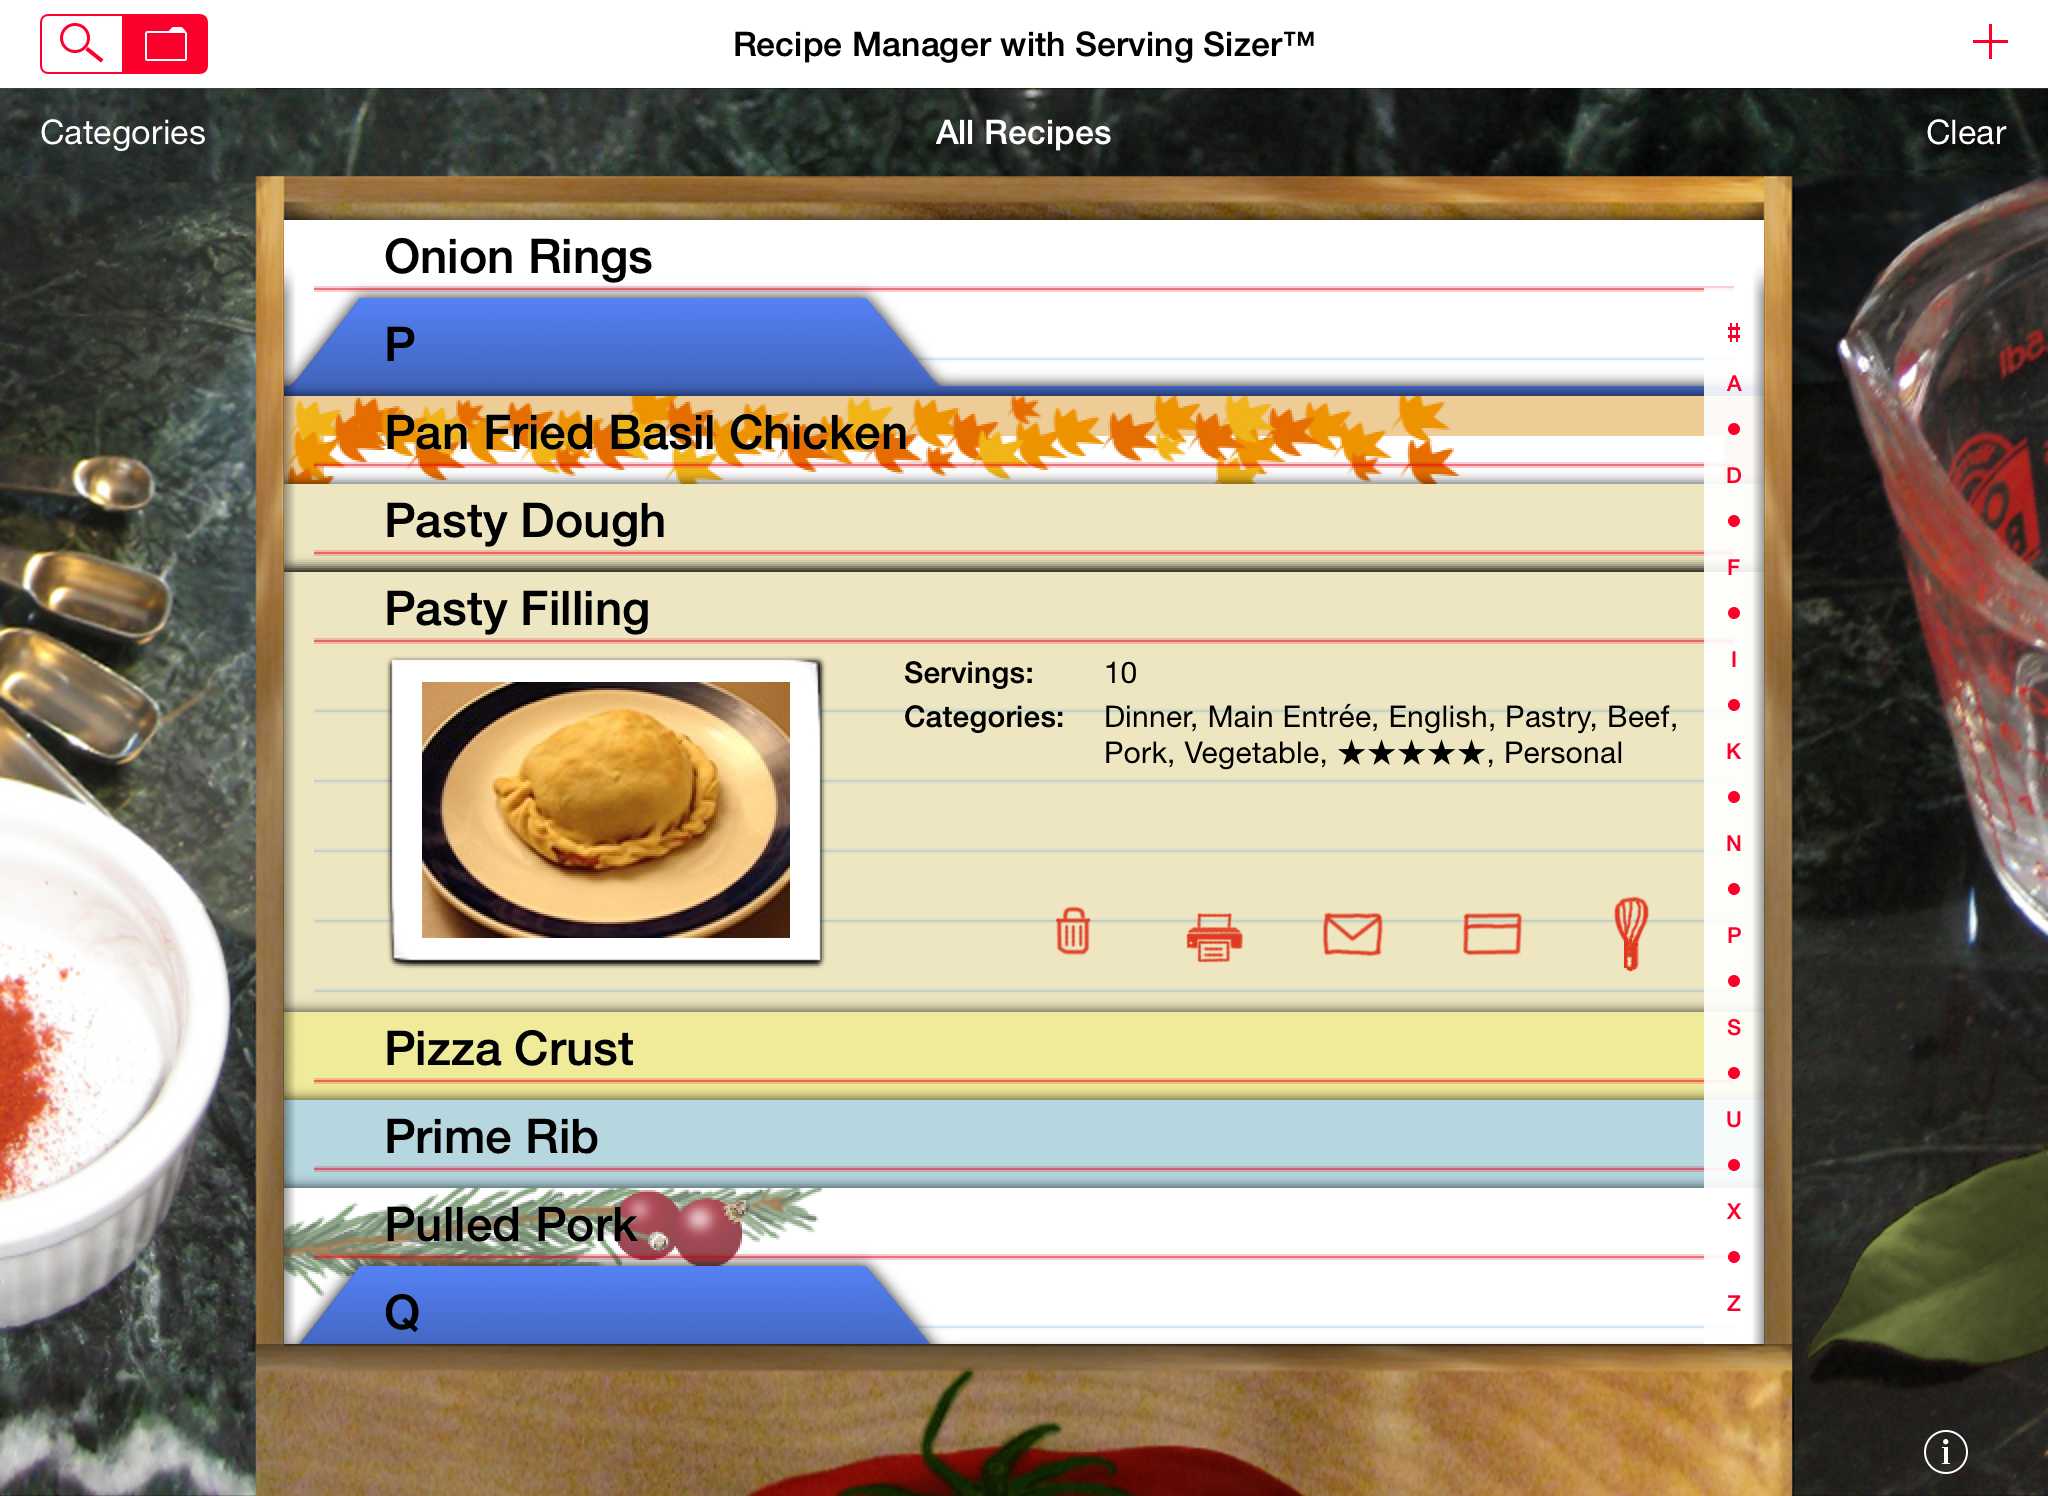 Recipe Manager with Serving Sizer search by alphabetical index